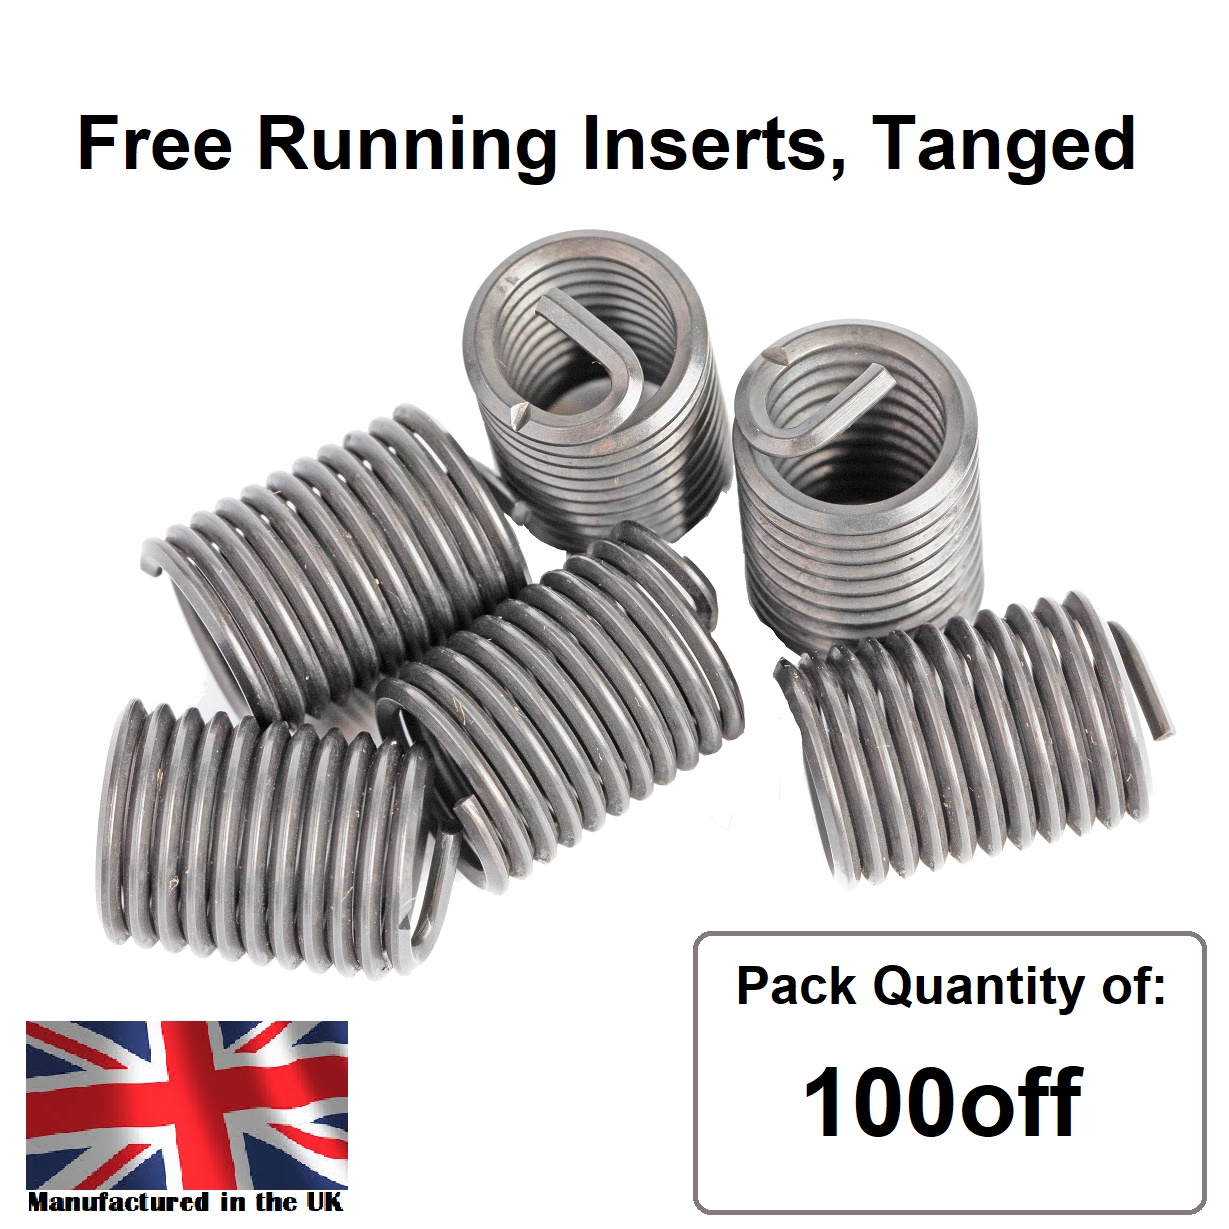 6-32 x 2.5D UNC, Free Running, Tanged, Wire Thread Repair Insert, 304/A2 Stainless (Pack 100)